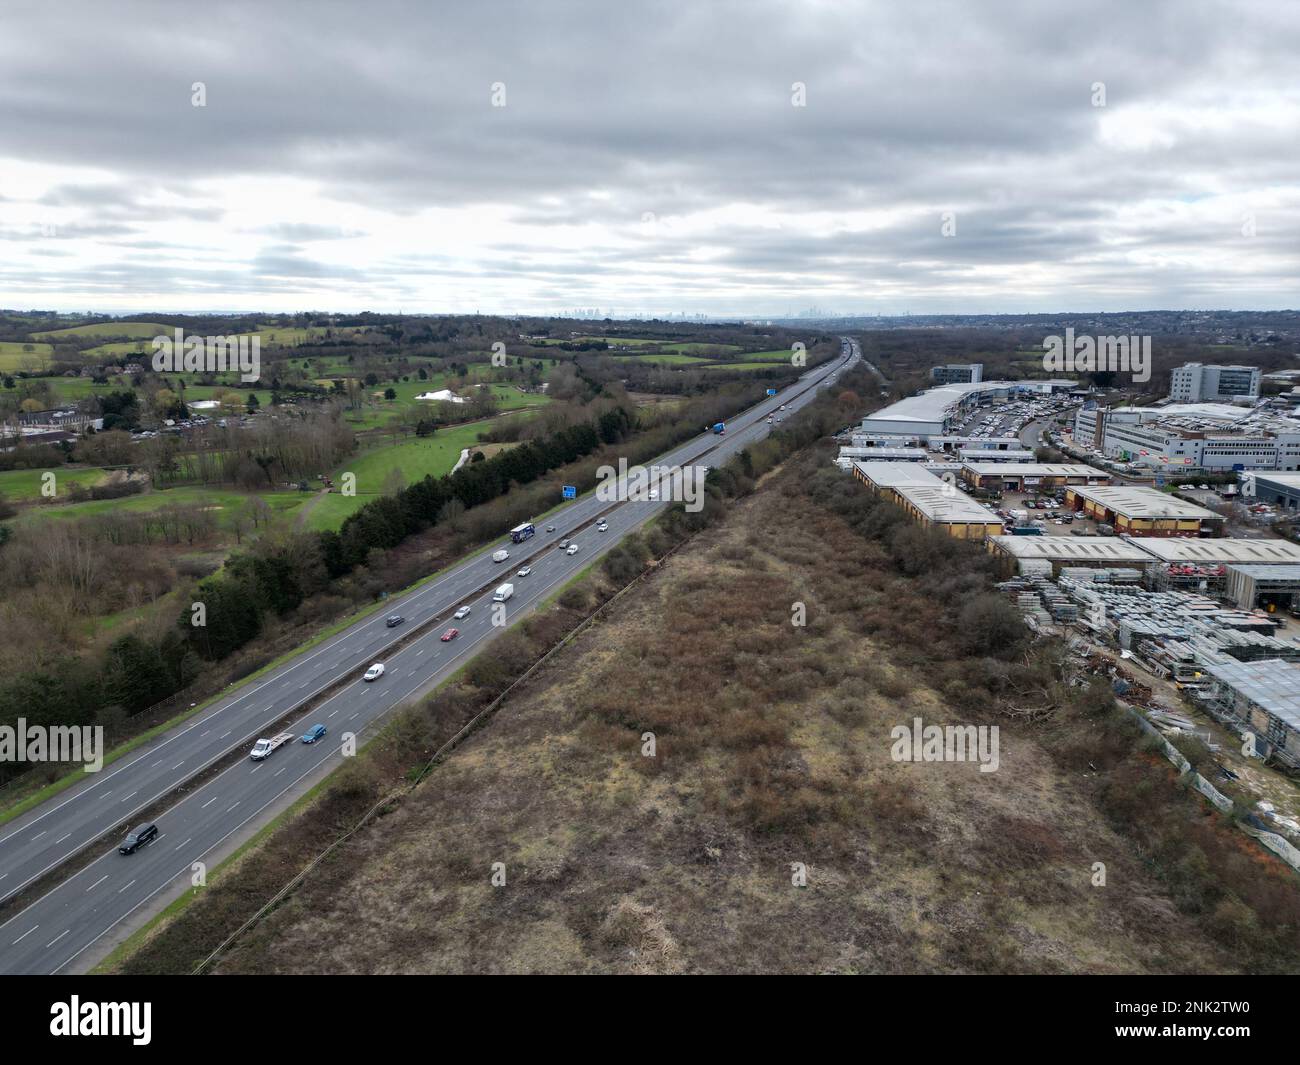 M11 Debden Essex Drone, Aerial, view from air, birds eye view, Stock Photo